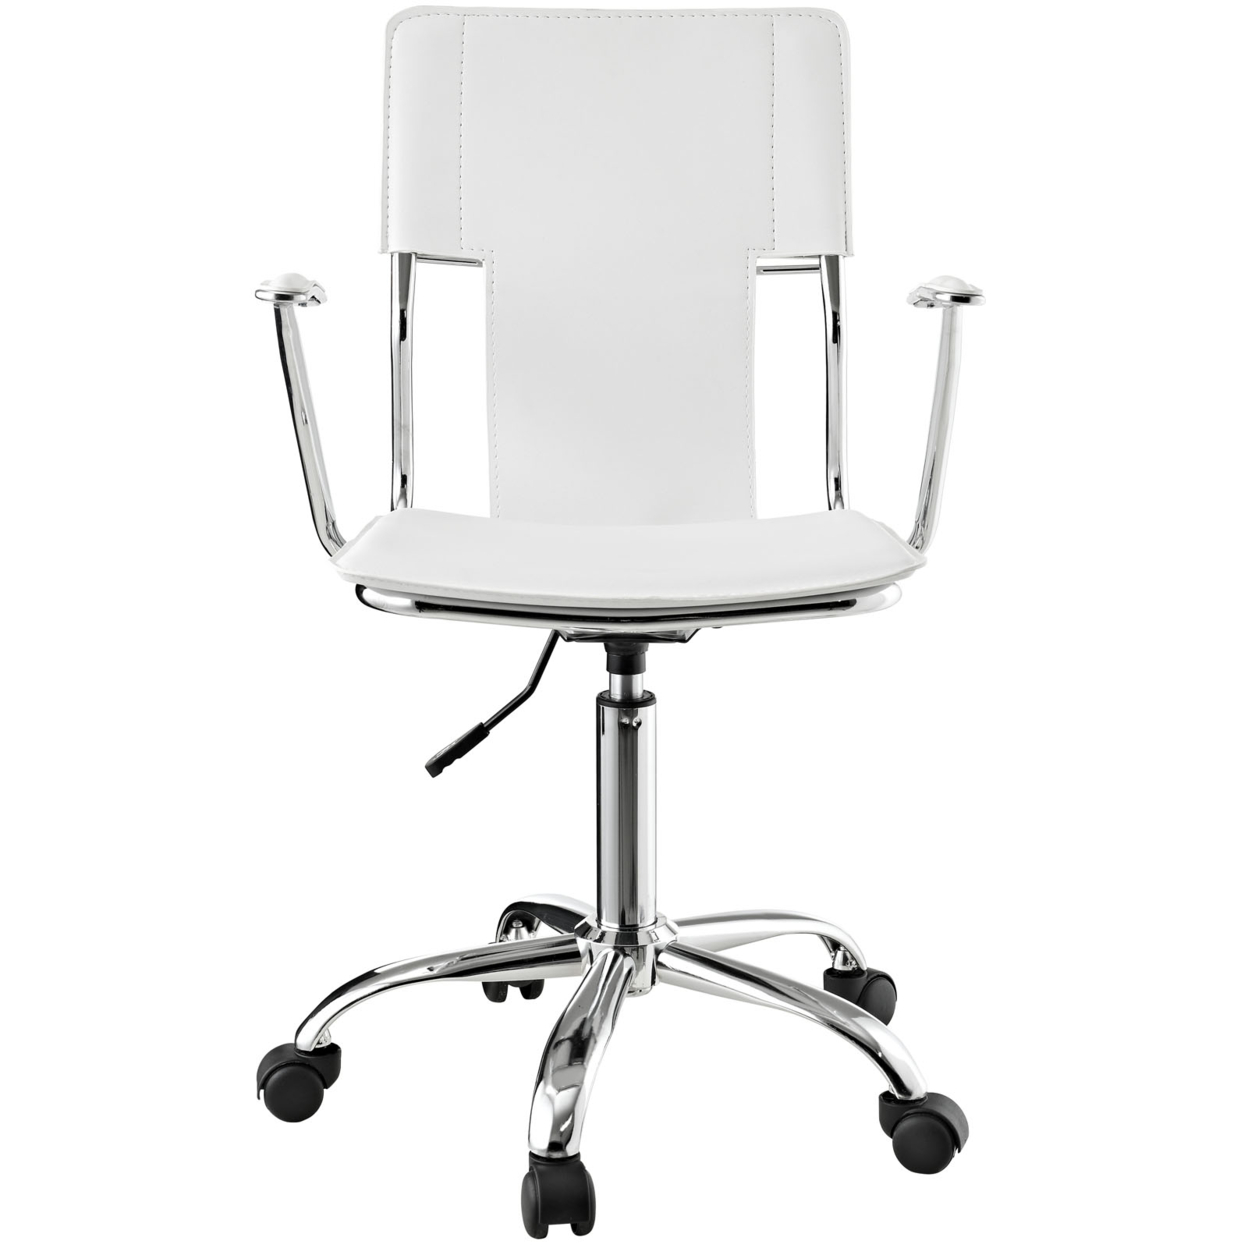 White Studio Office Chair - image 4 of 5